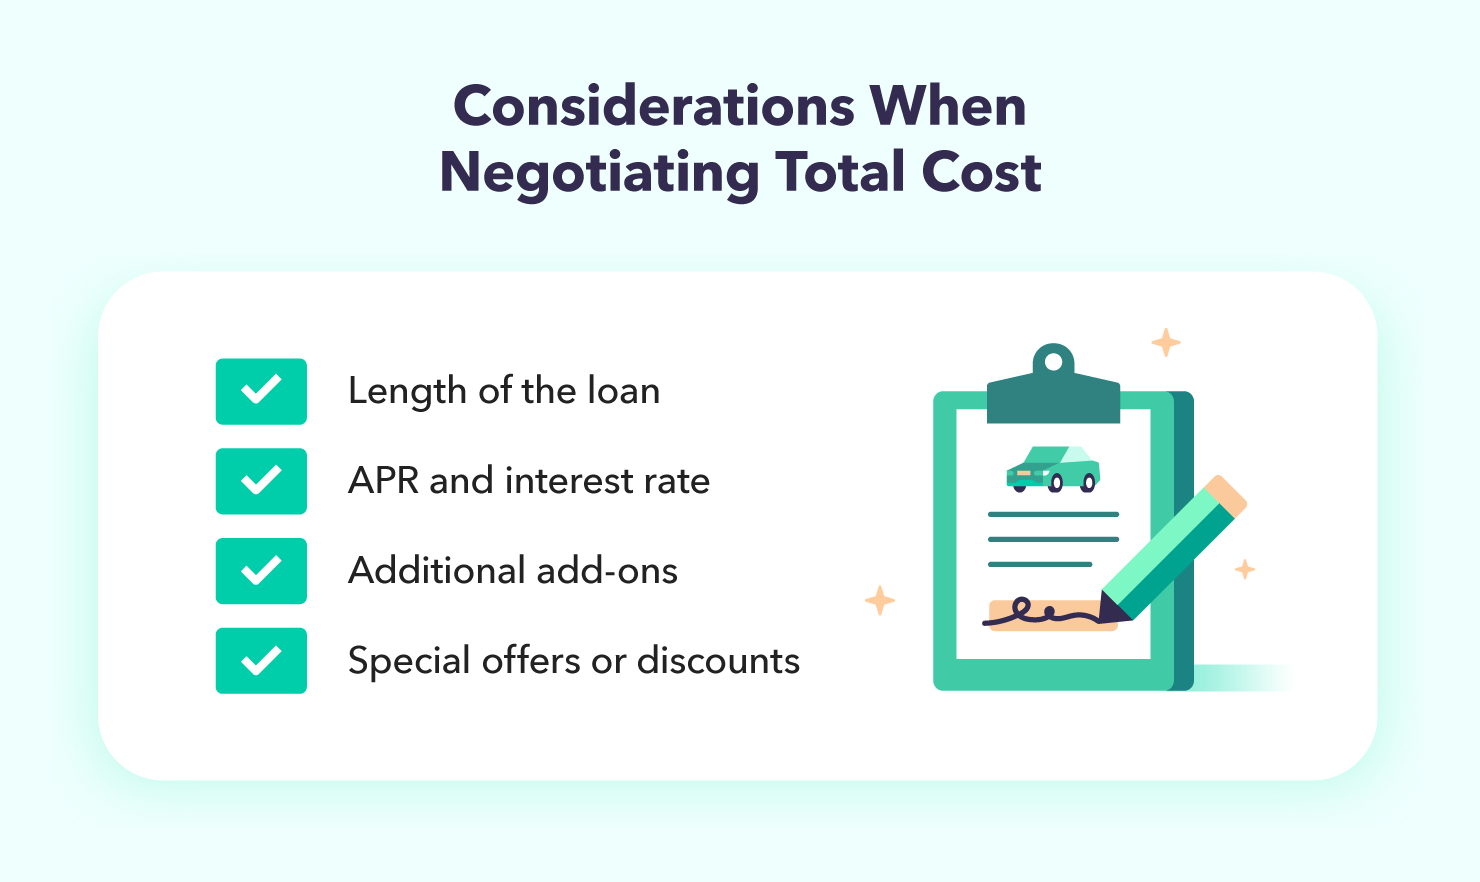 Considerations when negotiating total cost: length of the loan, A.P.R. and interest rate, additional add-ons, and special offers or discounts.